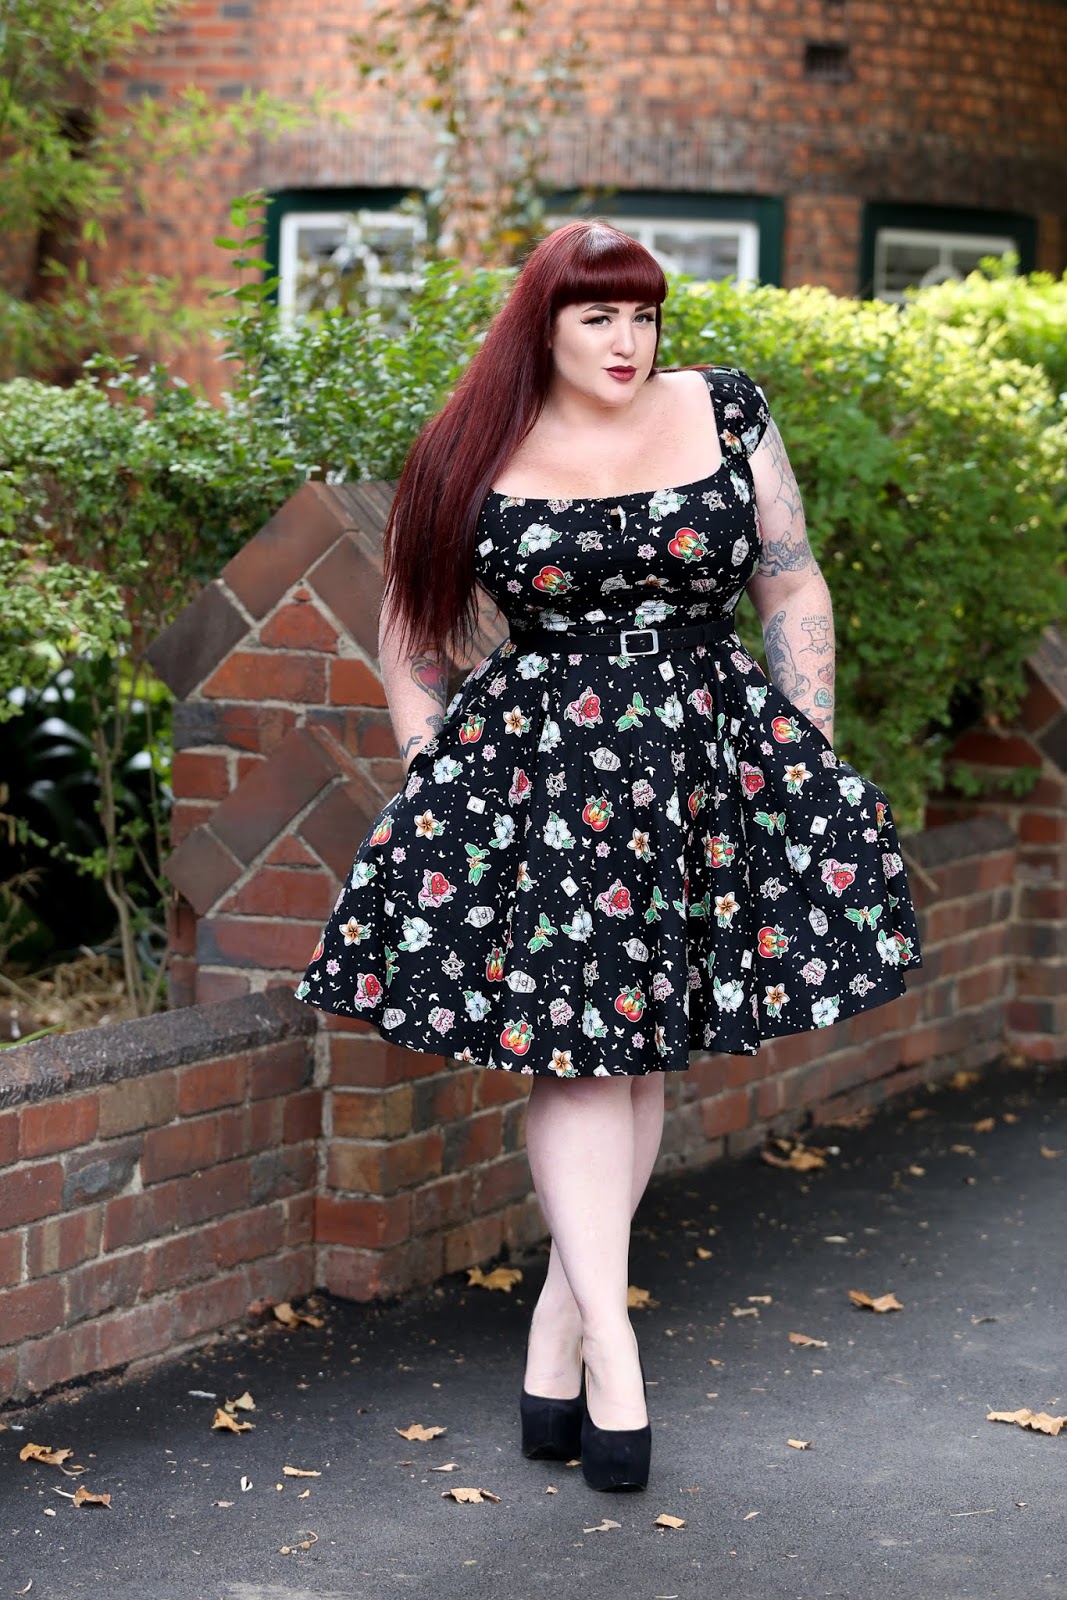 Curves to Kill...: Roses, spiders and lovebirds - oh my!